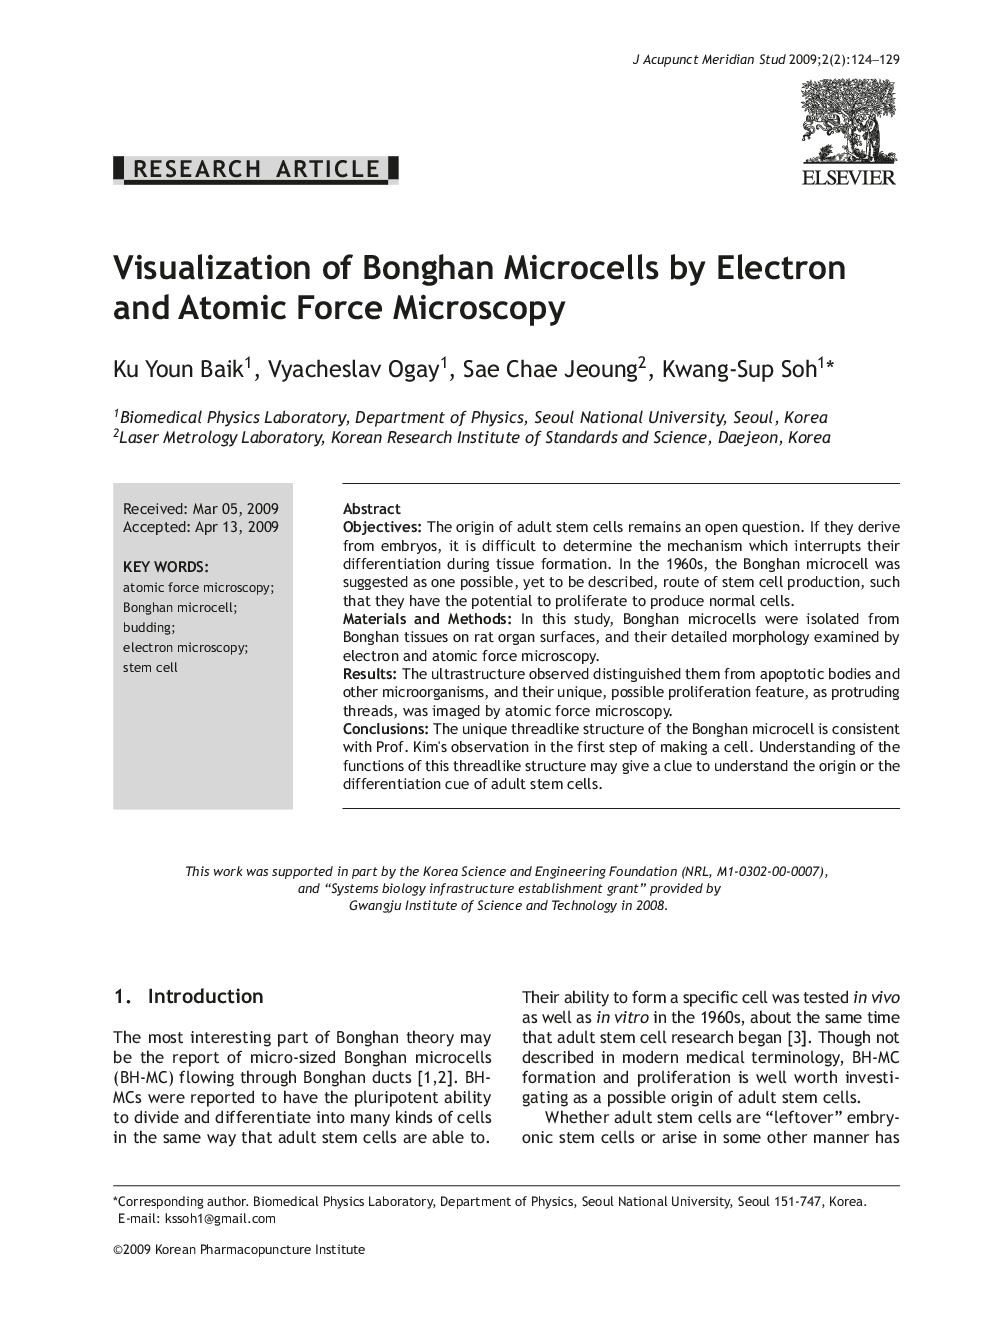 Visualization of Bonghan Microcells by Electron and Atomic Force Microscopy 